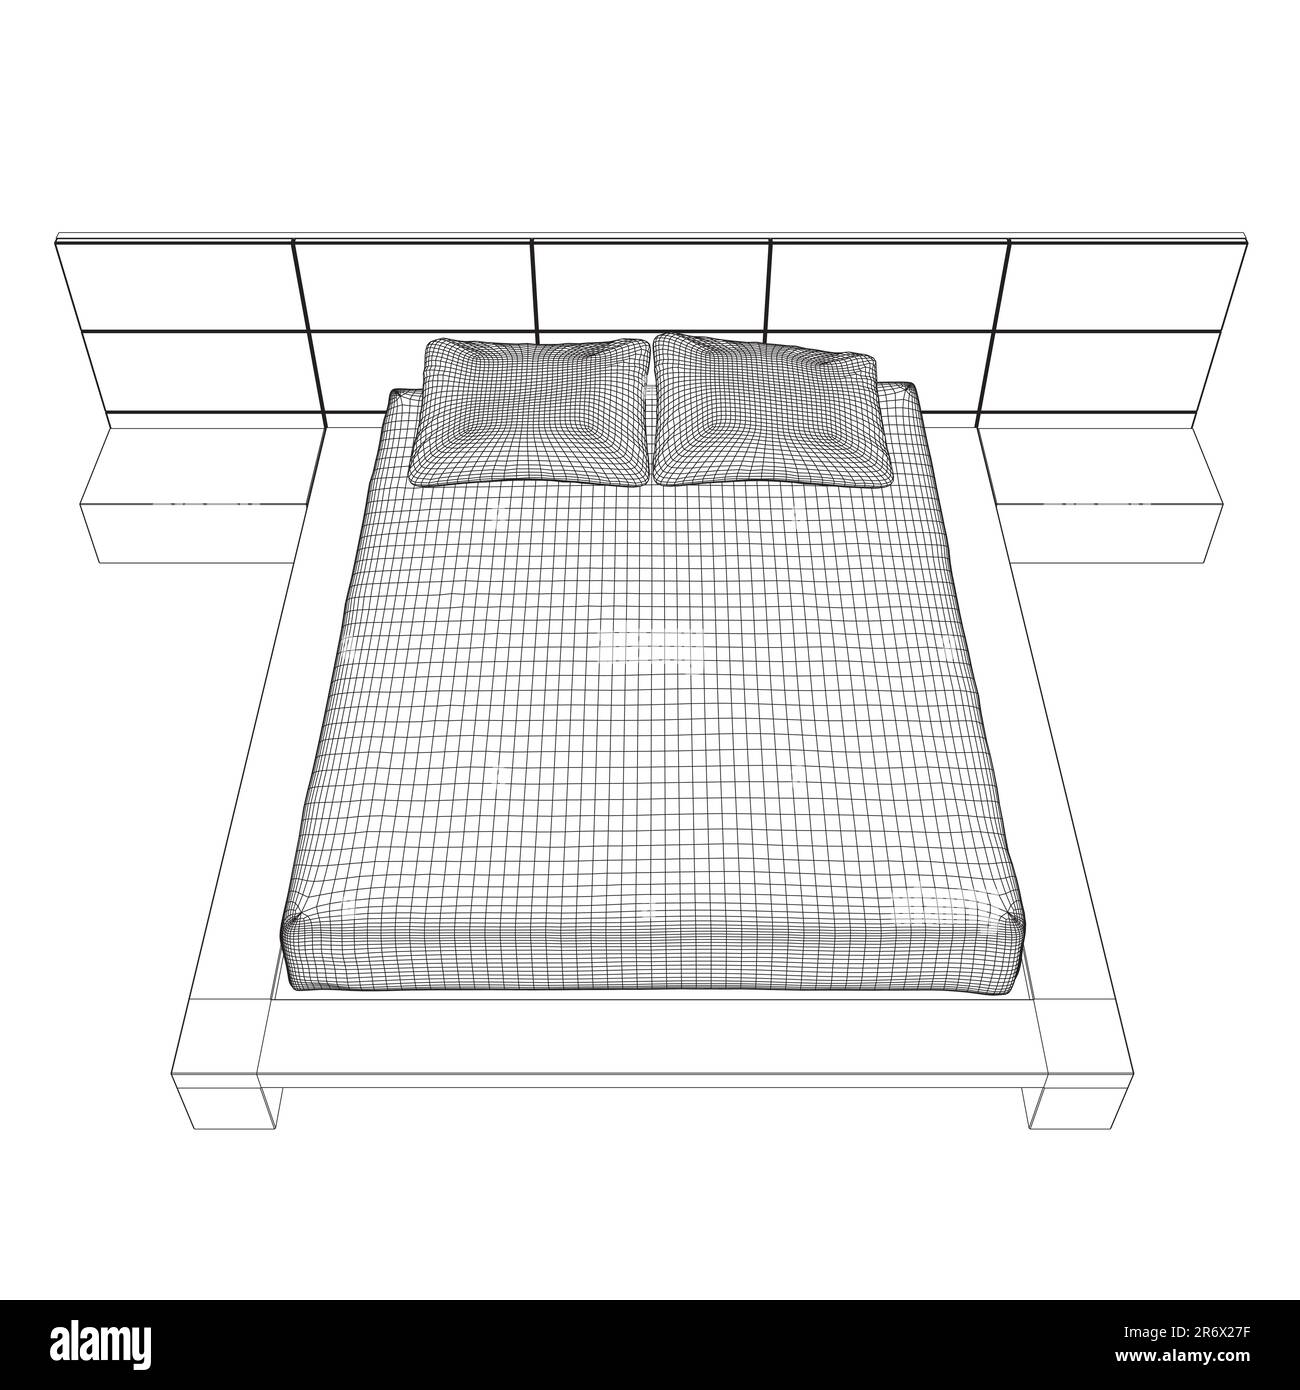 Wireframe drawing of double bed. Modern comfortable luxury furnitures for bedroom. Wireframe of a sleeping bed with pillows from black lines isolated Stock Vector